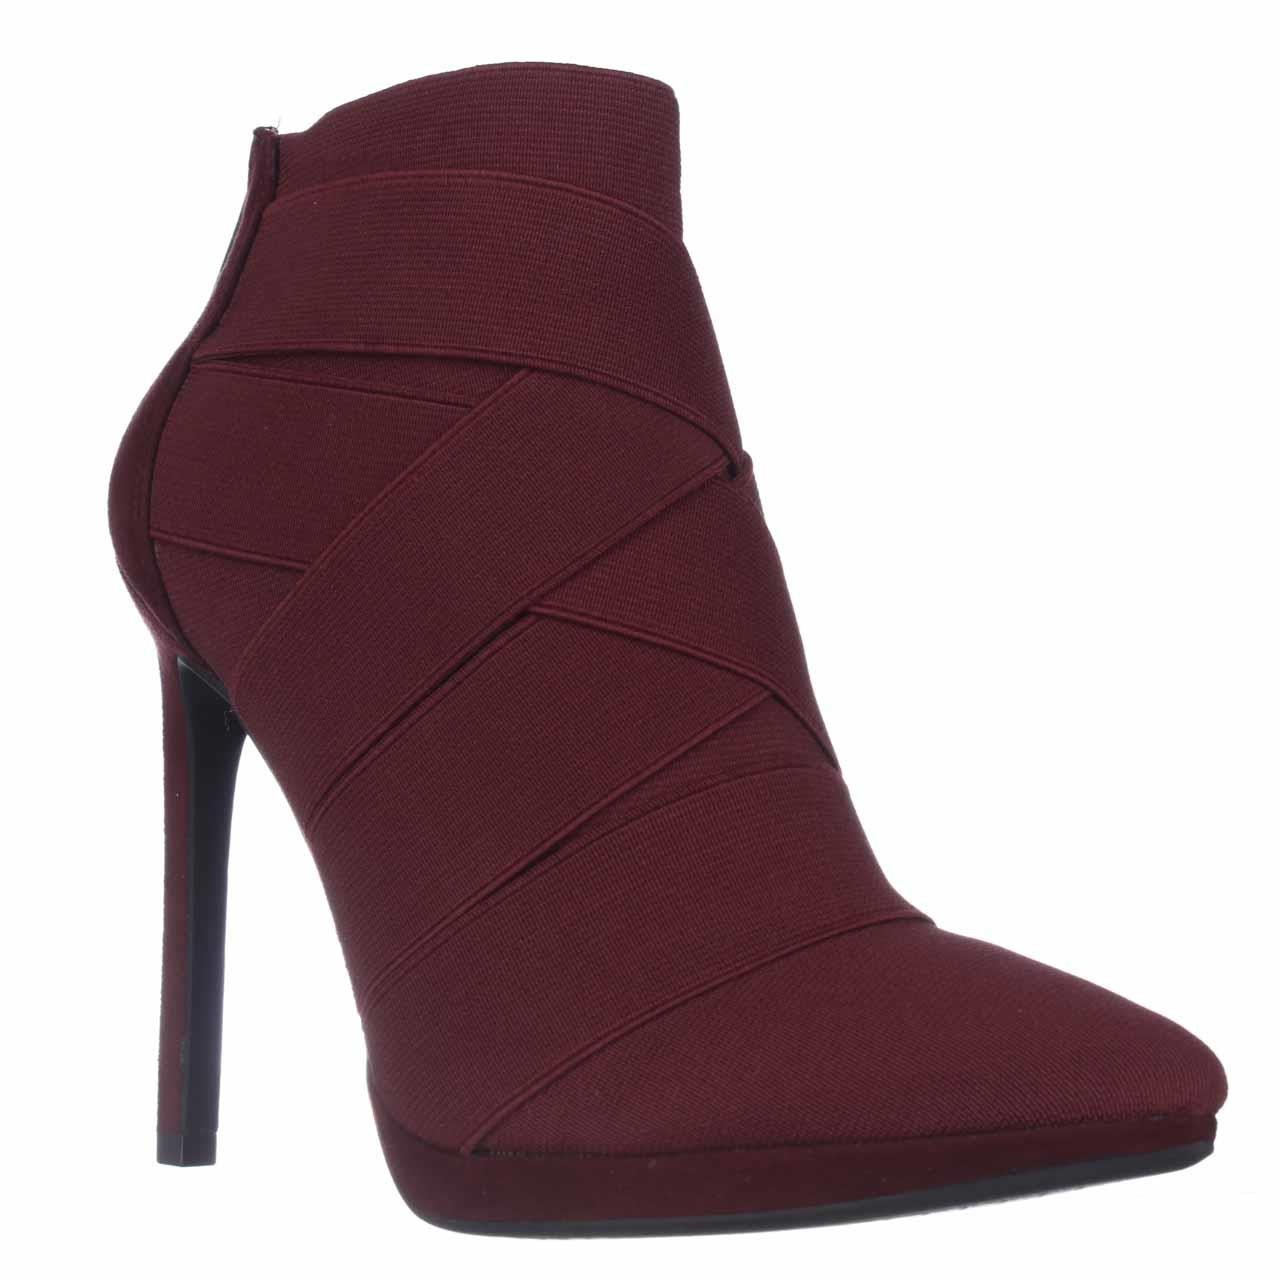 Jessica Simpson Breena Elastic Wrap Dress Ankle Boots in Red - Lyst1280 x 1280